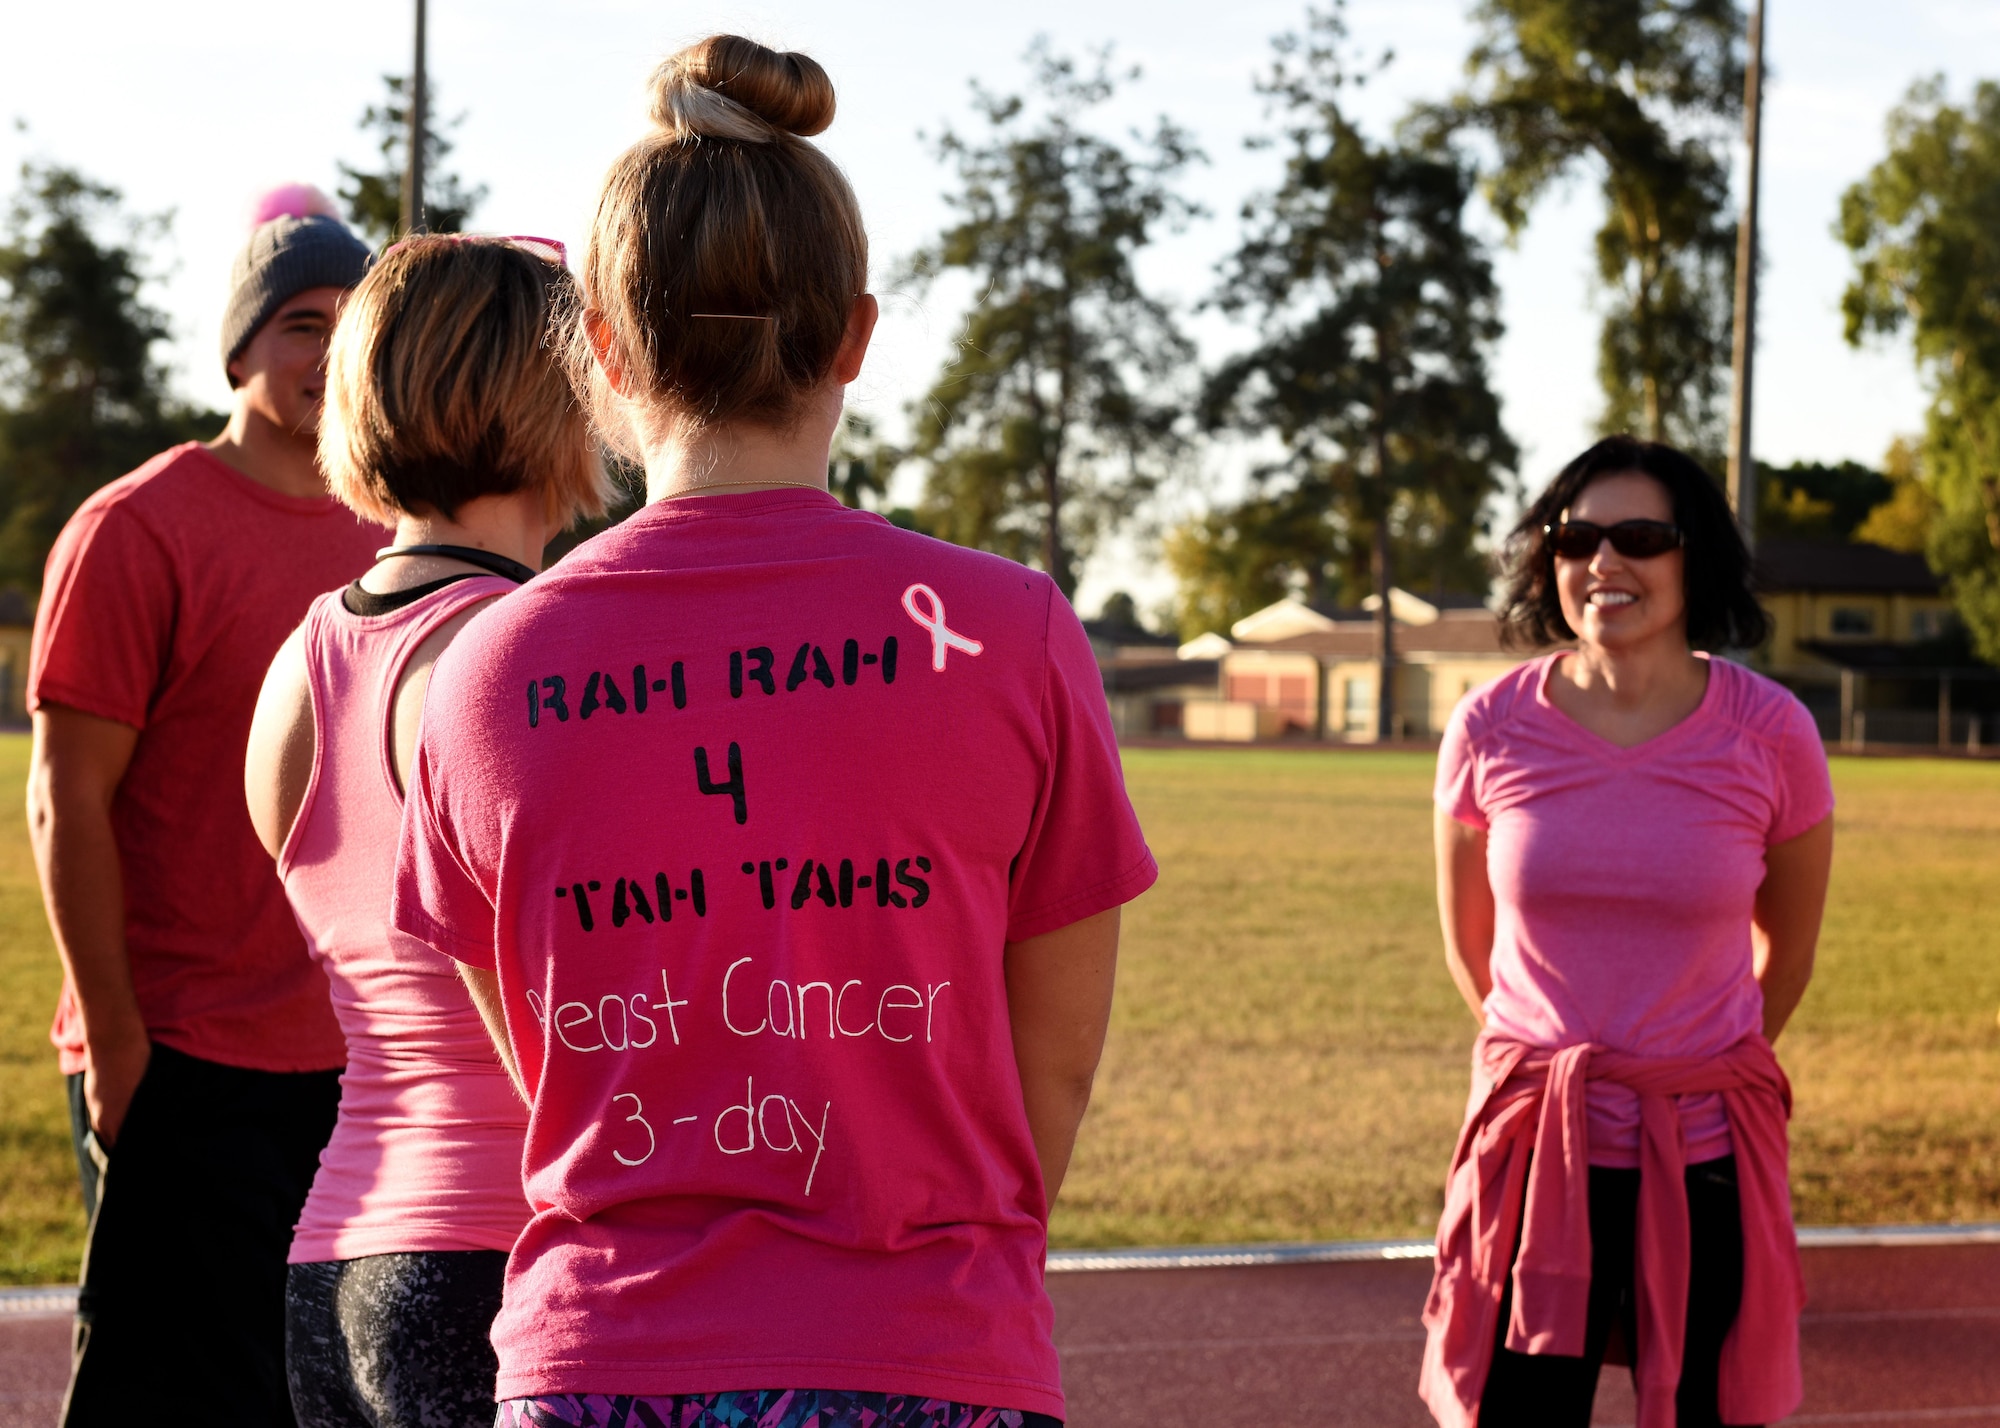 Participants gather at the track before a breast cancer awareness walk-a-thon at Incirlik AB, Turkey, Oct. 27, 2017. Walkers were encouraged to wear pink, which is the chosen color for this cause. (U.S. Air Force photo by Staff Sgt. Rebeccah Woodrow)